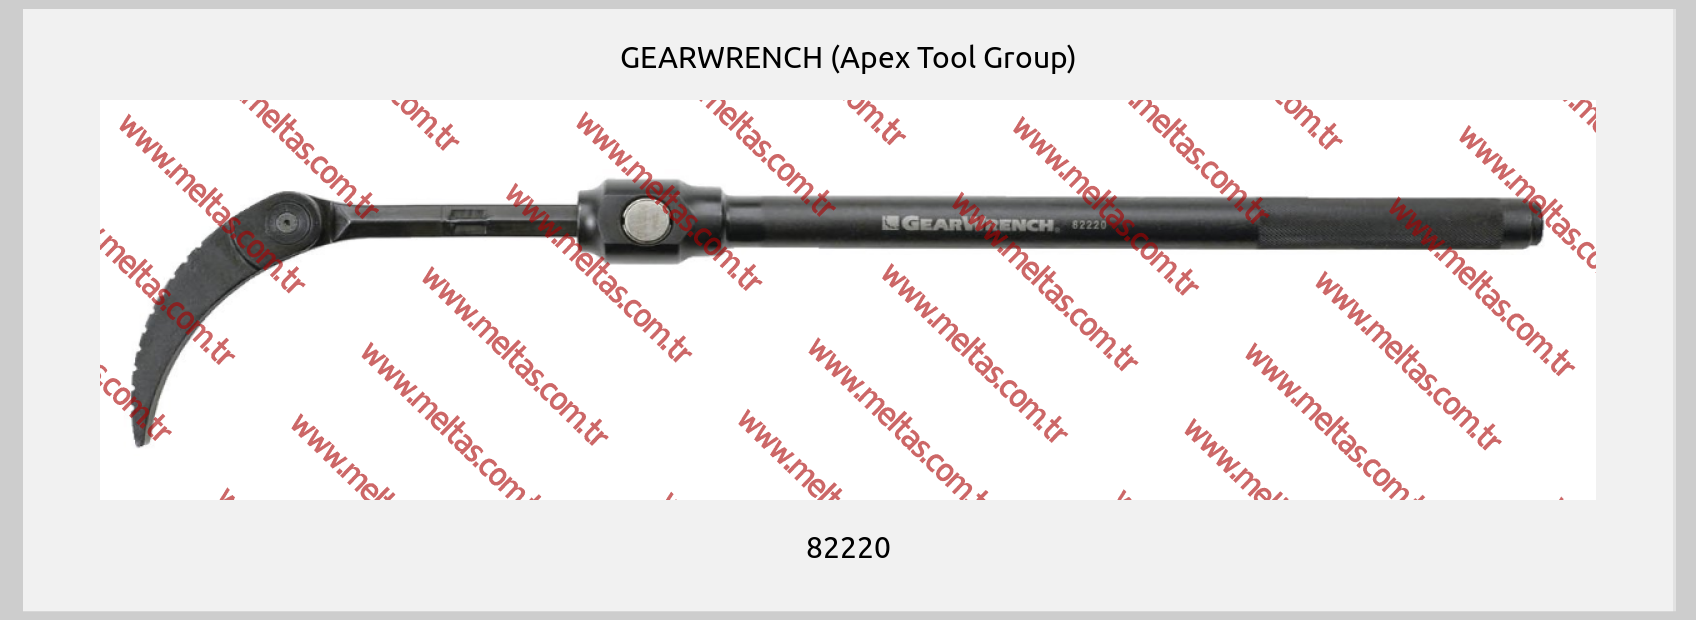 GEARWRENCH (Apex Tool Group) - 82220